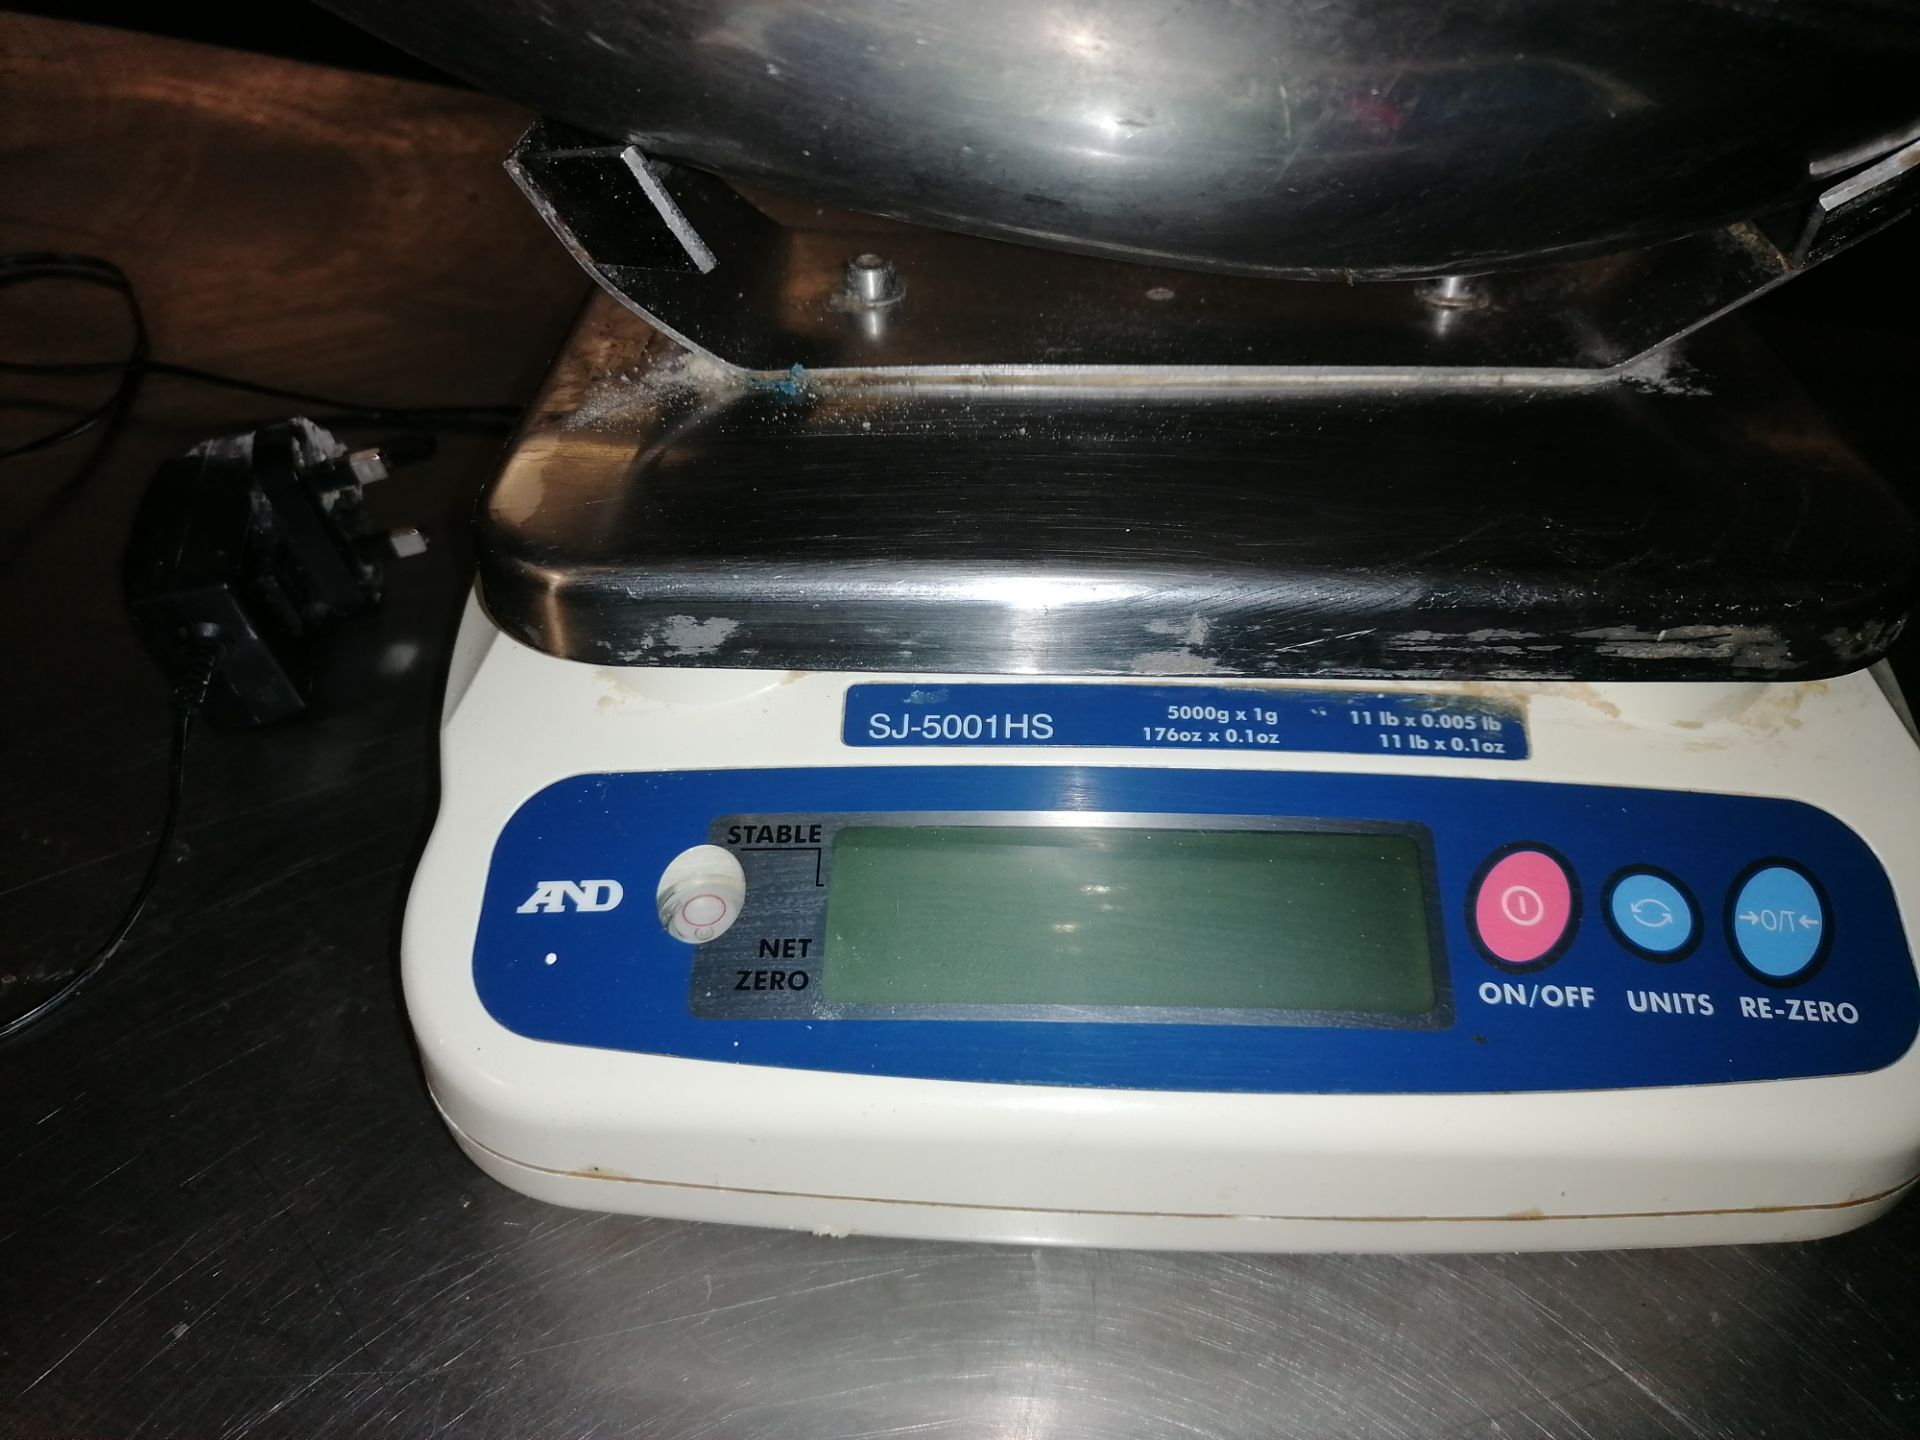 Weighing SJ-5001HS Digital Portion Scale, 5000g x 1g - Image 3 of 5